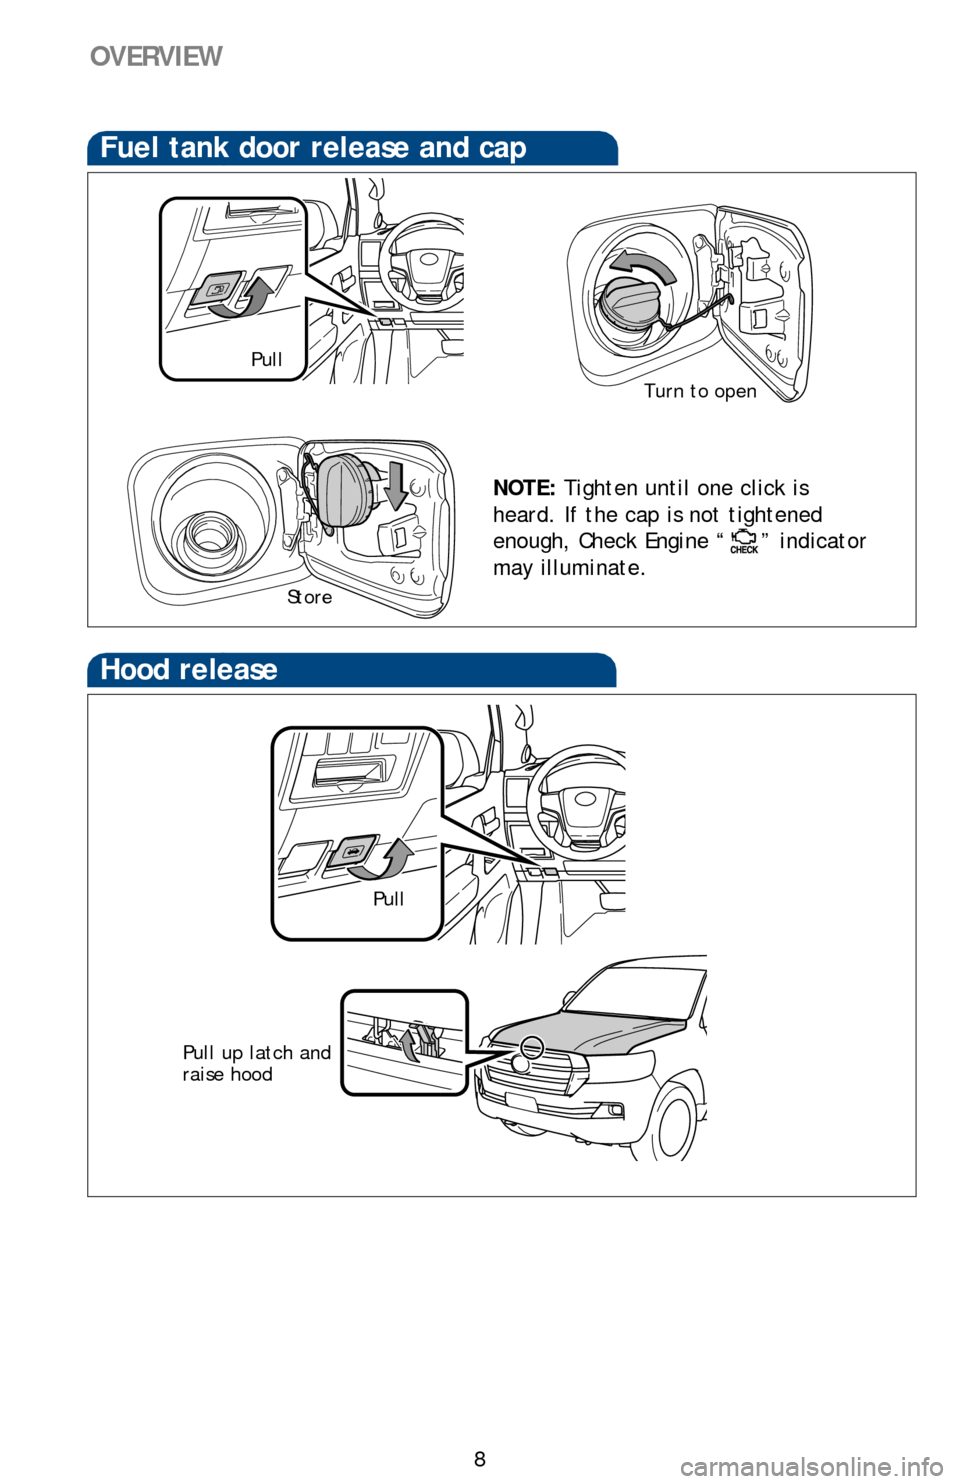 TOYOTA LAND CRUISER 2016 J200 Quick Reference Guide 8
Hood release
Pull up latch and 
raise hood
Fuel tank door release and cap
NOTE: Tighten until one click is 
heard. If the cap is not tightened 
enough, Check Engine “
” indicator 
may illuminate